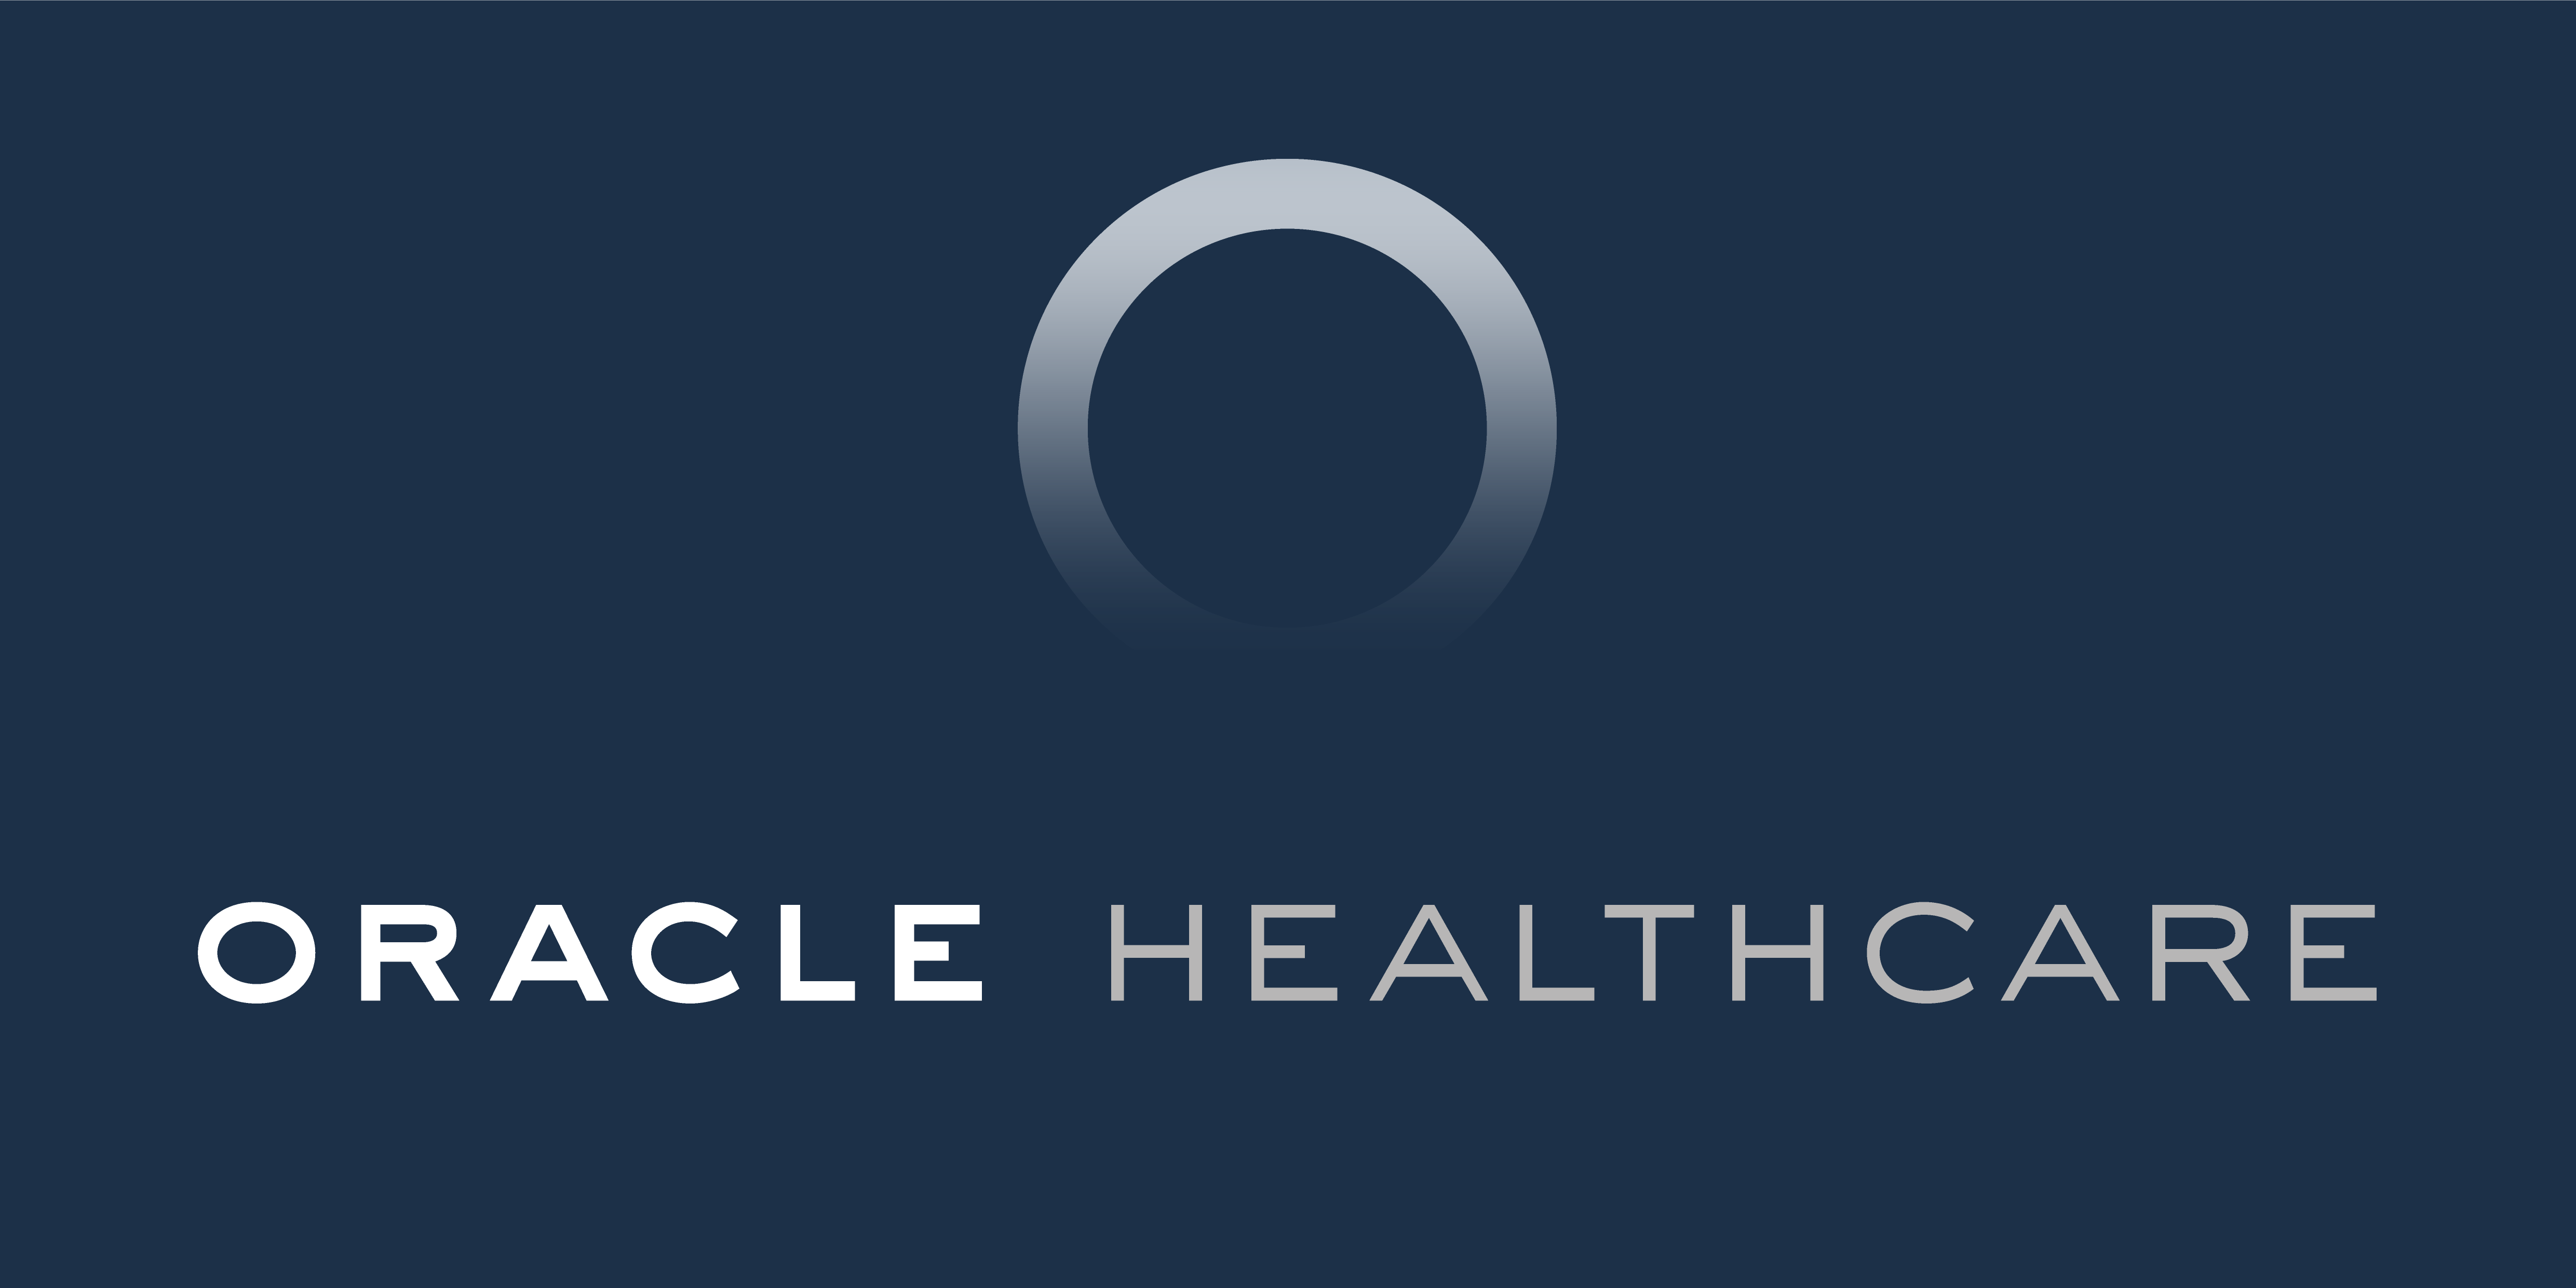 Oracle Healthcare